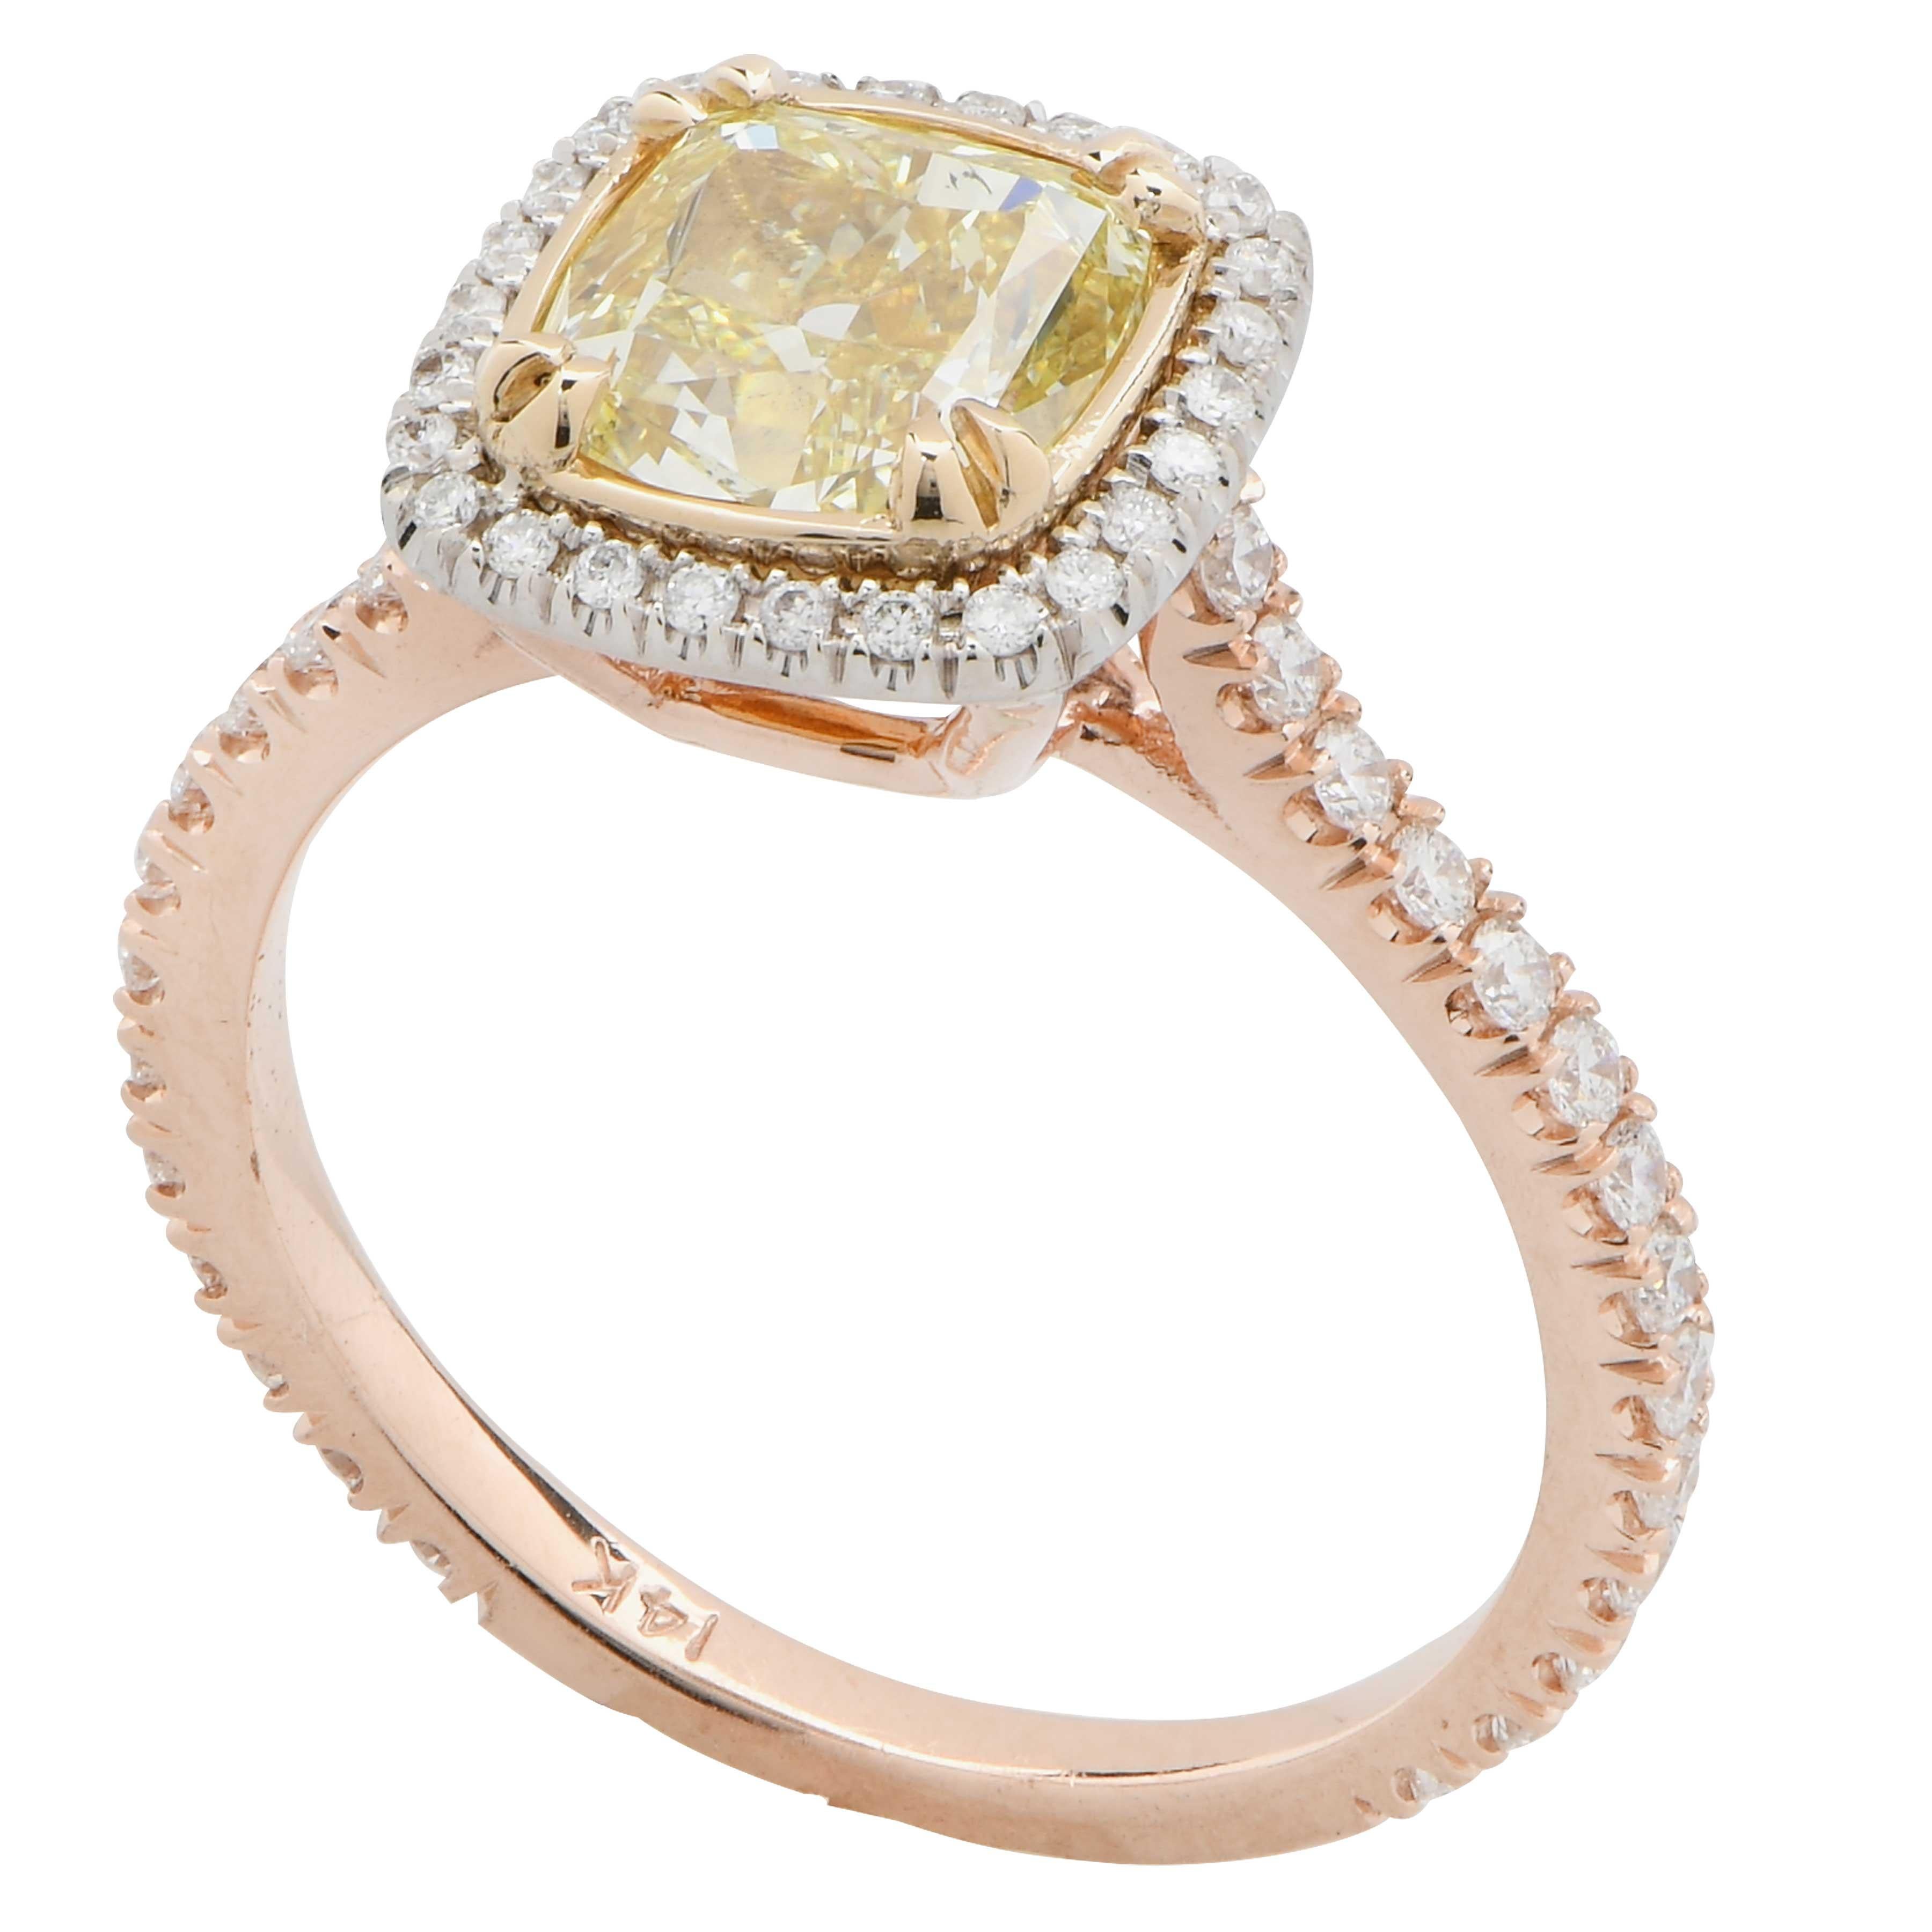 2.22 Carat Cushion Cut Diamond set in 14 Karat Yellow and White Gold Mounting with 54 round brilliant cut diamonds with an estimated total weight of .40 carats.
Ring Size is 7 (can be sized)
Metal Weight is 3.7 Grams